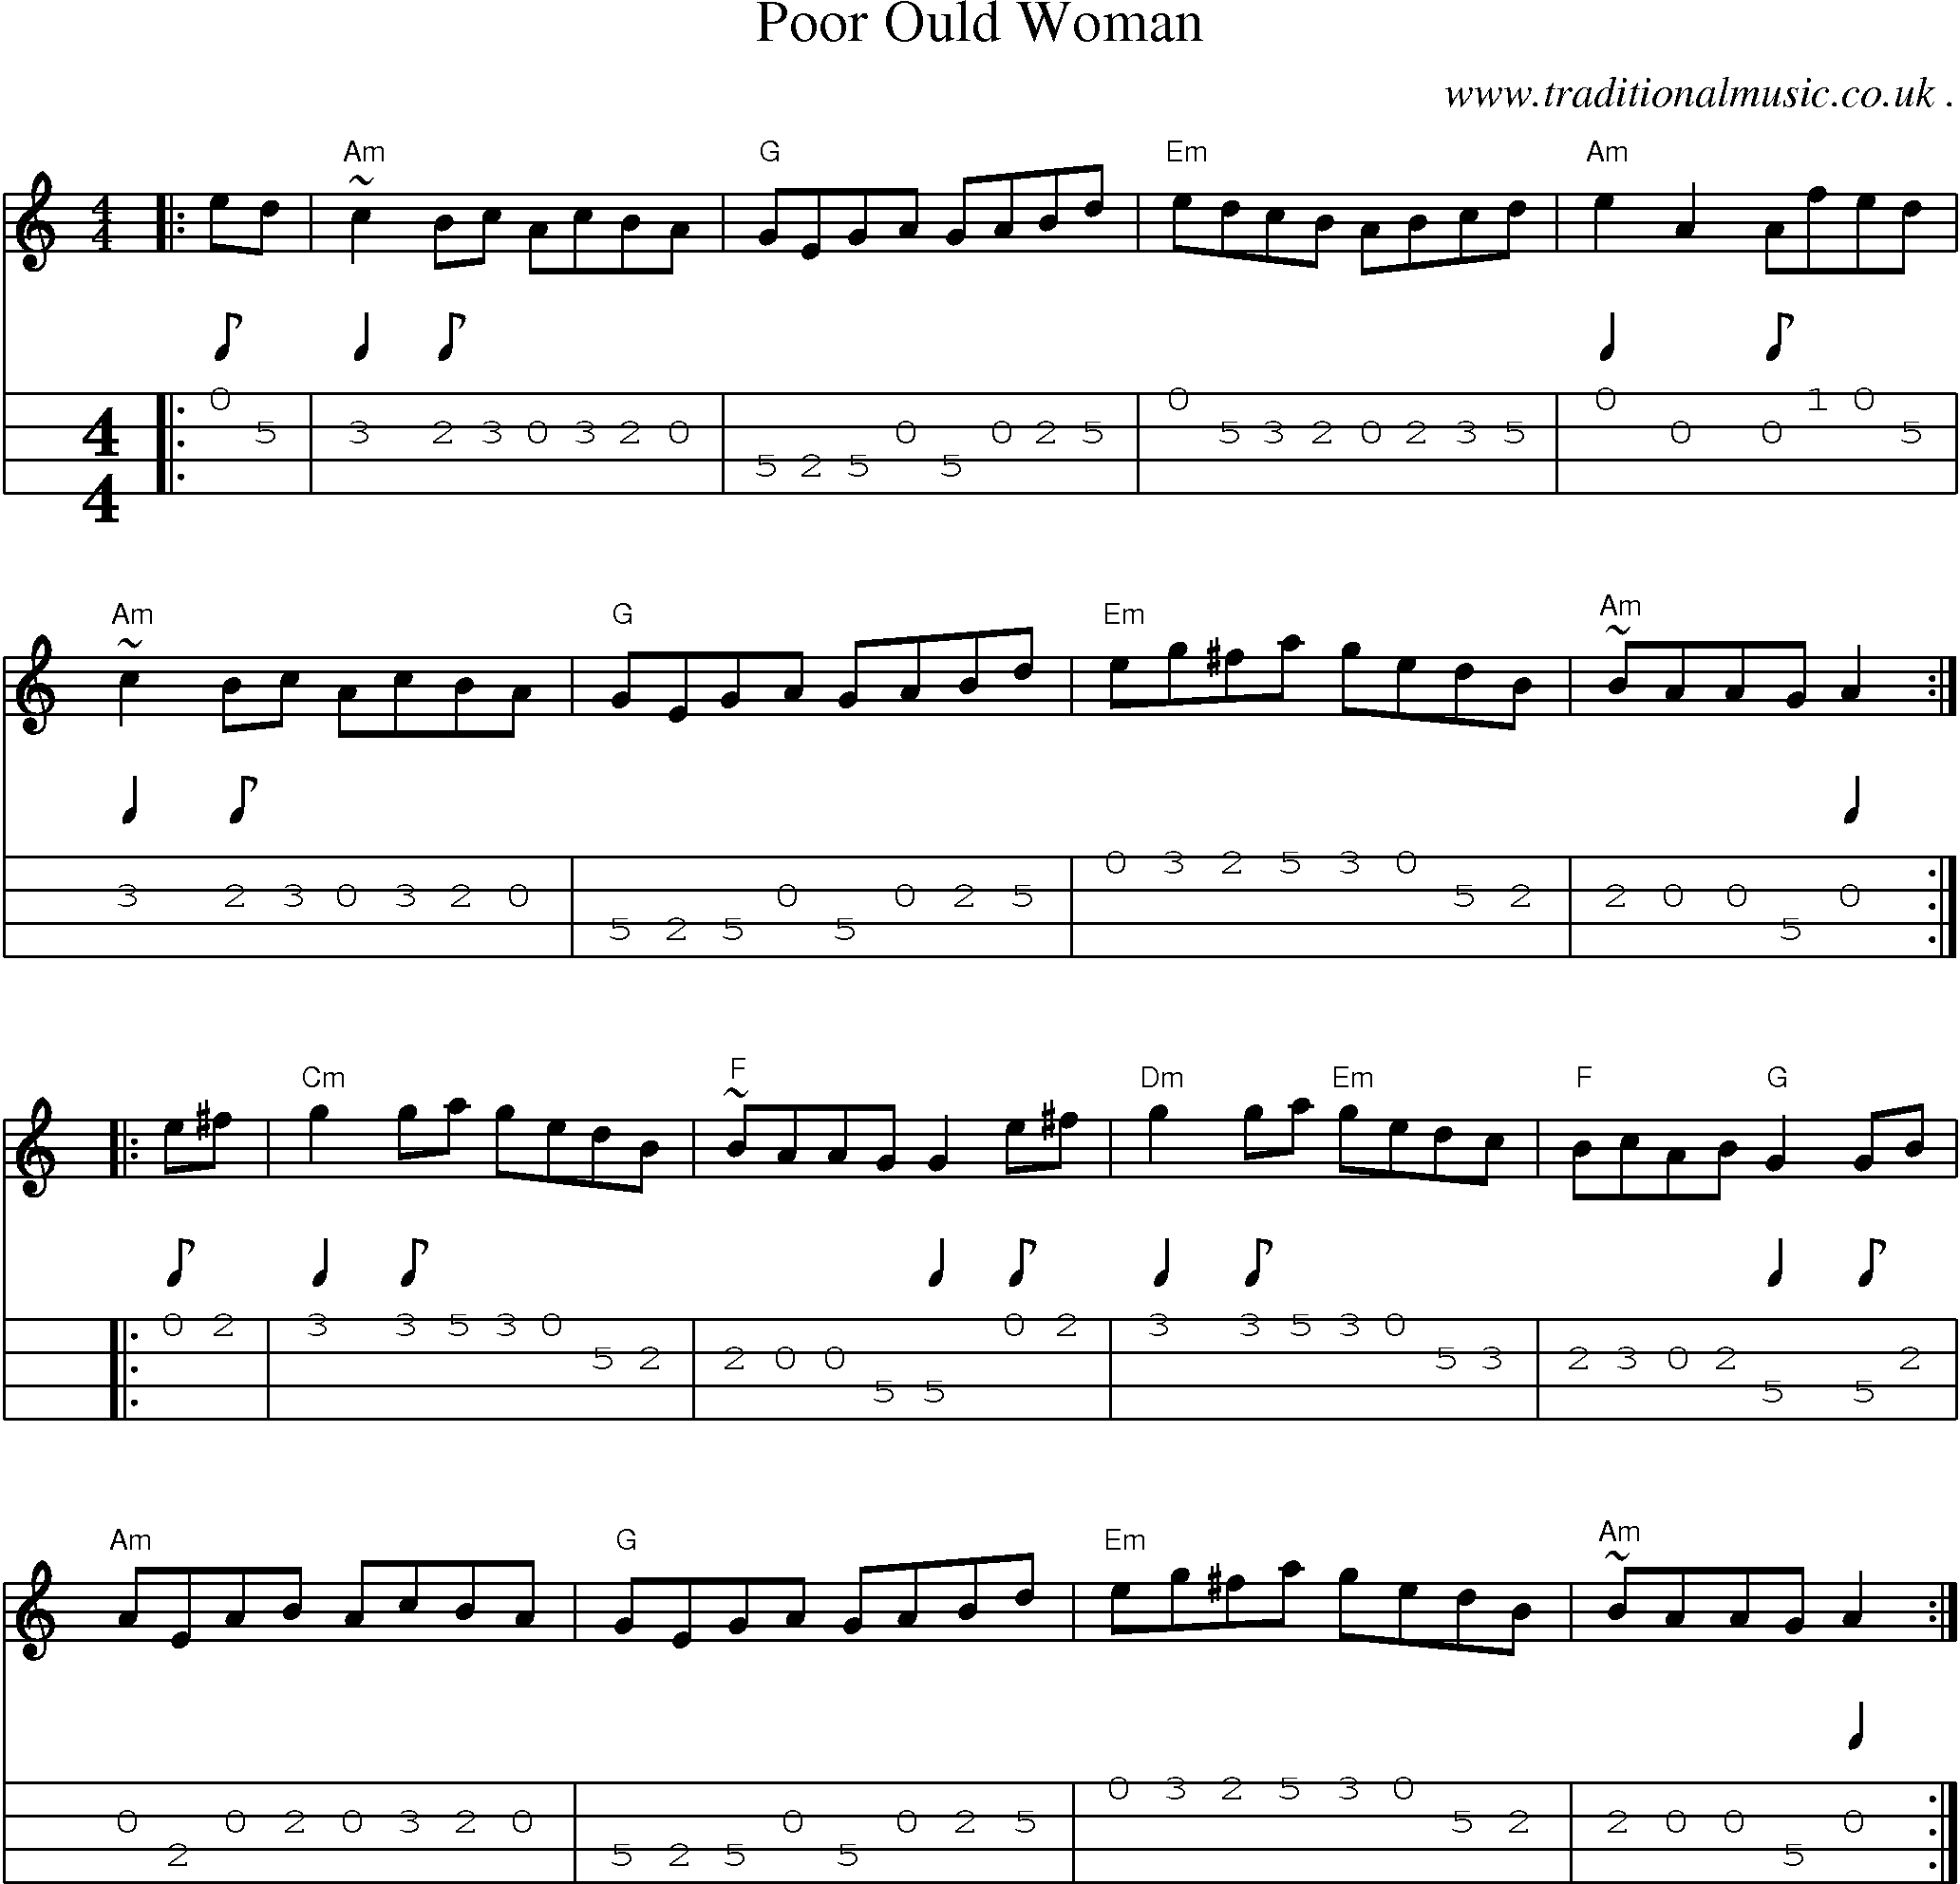 Music Score and Guitar Tabs for Poor Ould Woman